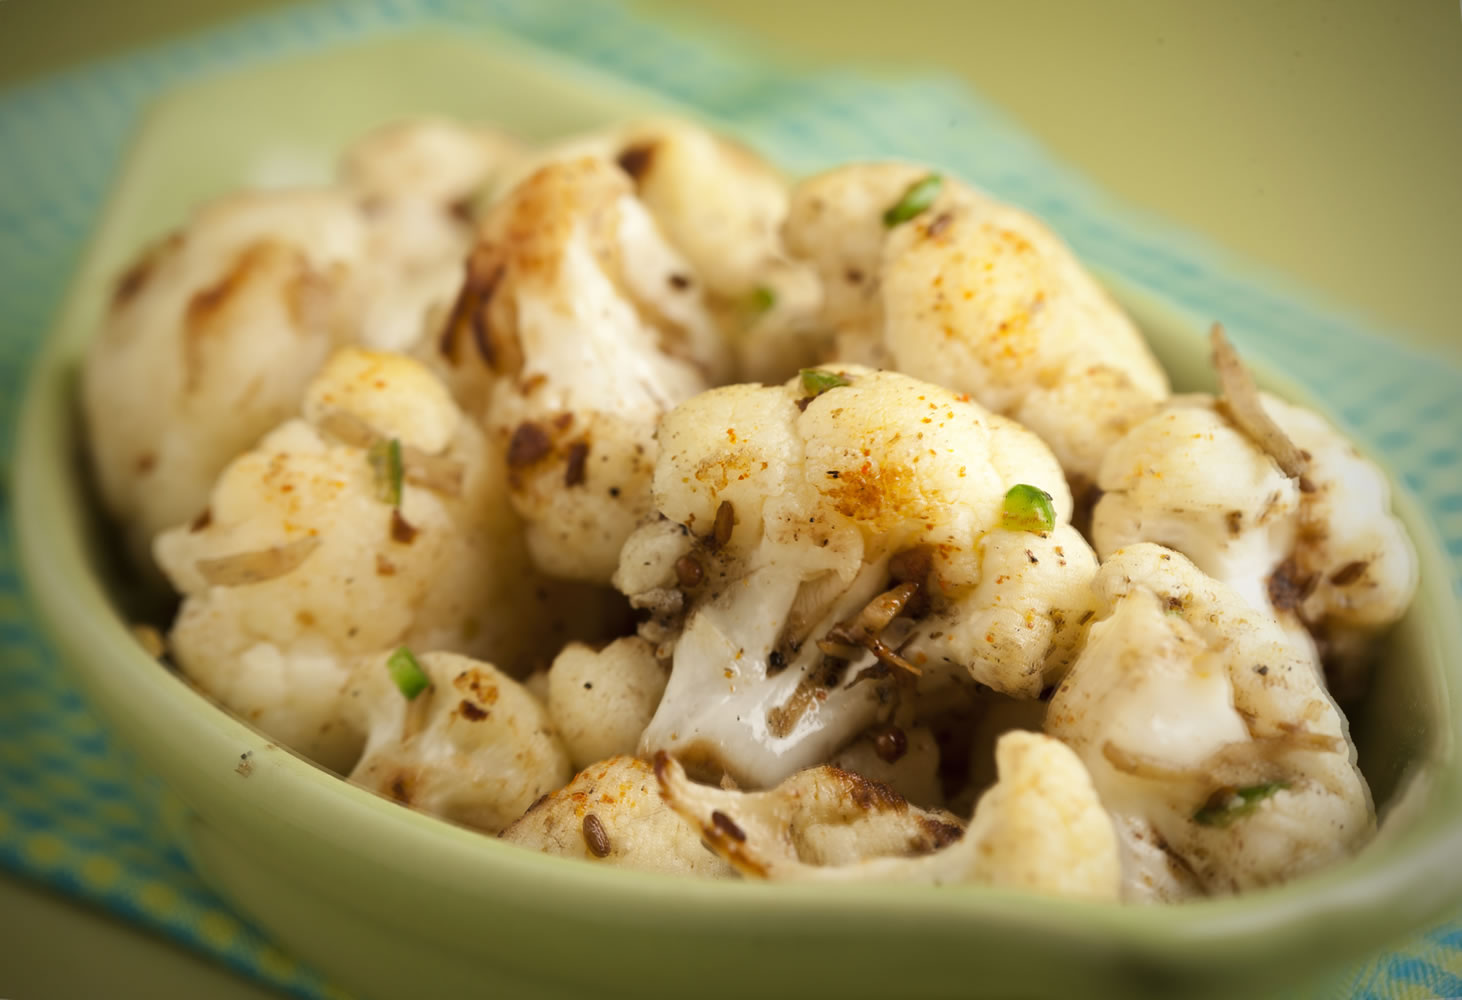 Cauliflower with ginger, garlic and green chiles.